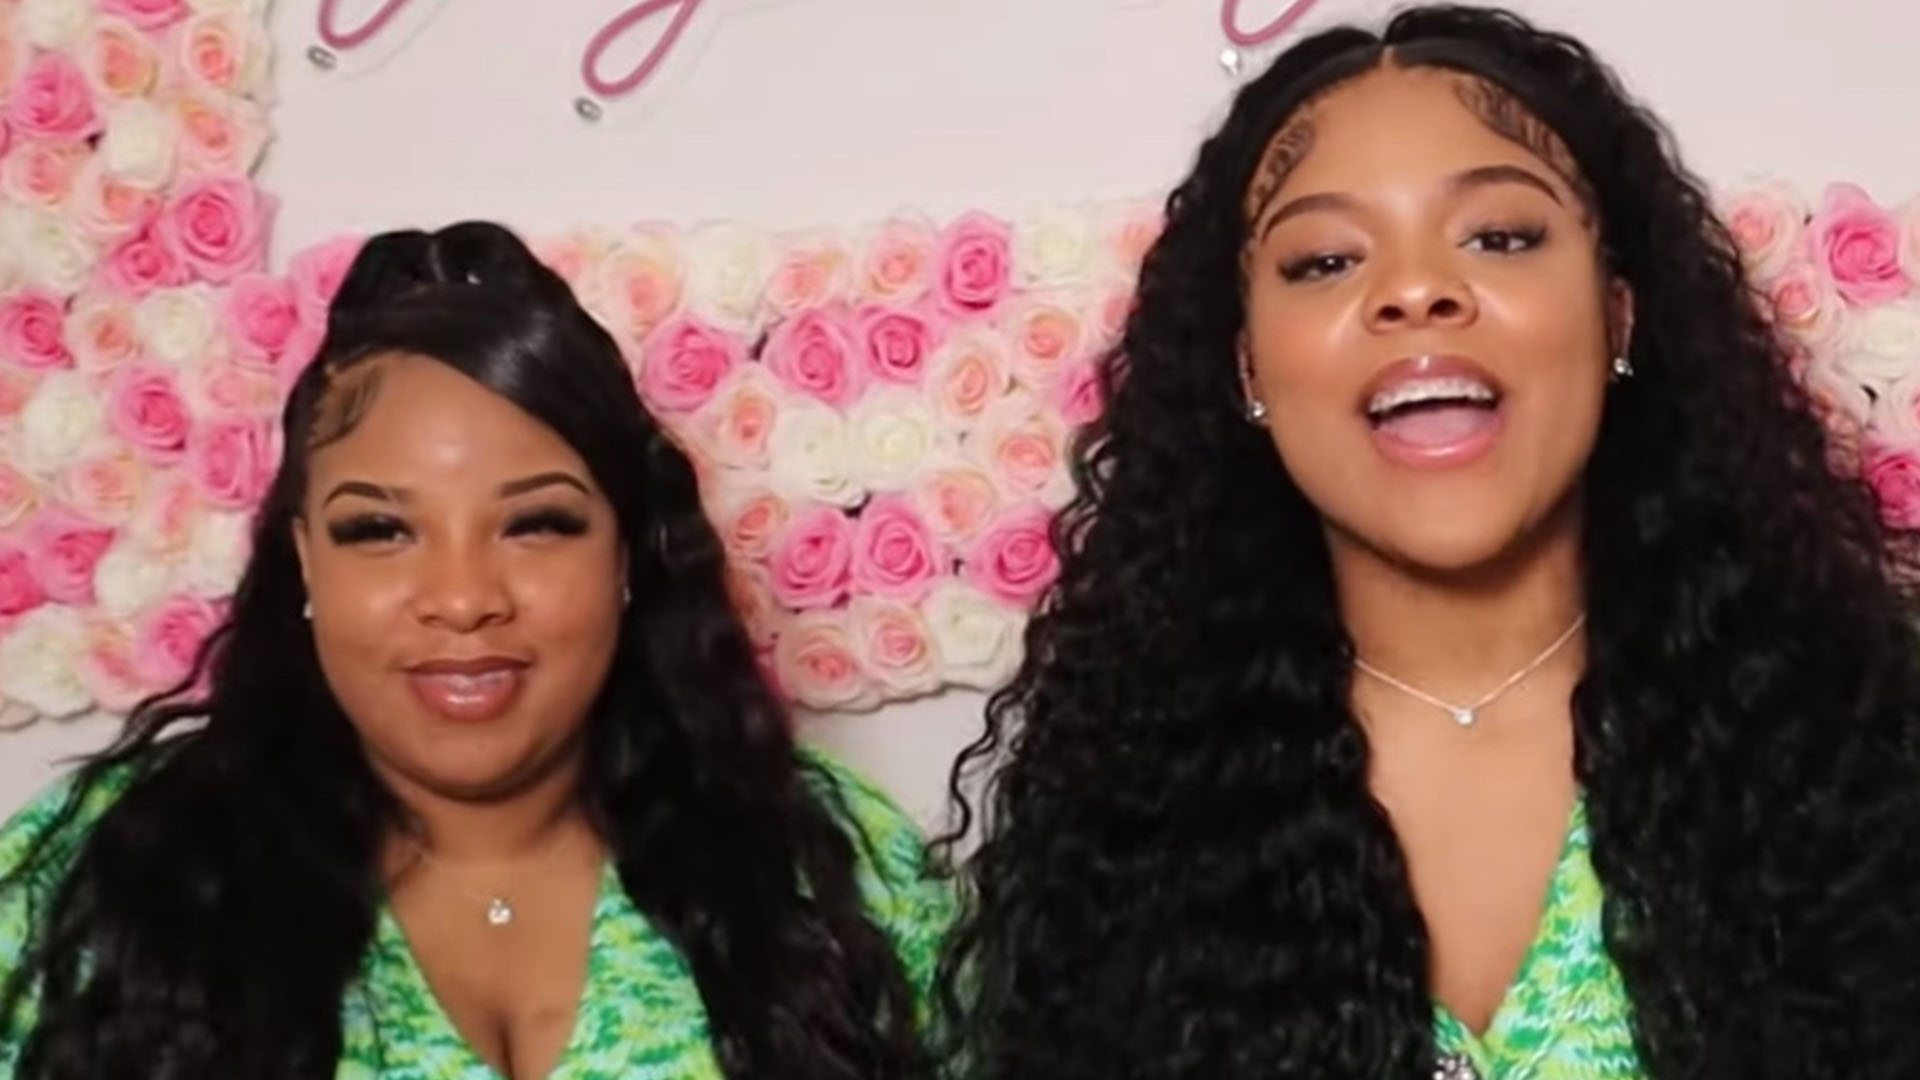 i’m-a-size-14-and-my-bestie-is-a-size-8-–-our-fashion-nova-haul-was-very-cute-but-nsfw-on-a-curvy-girl…-–-the-us-sun